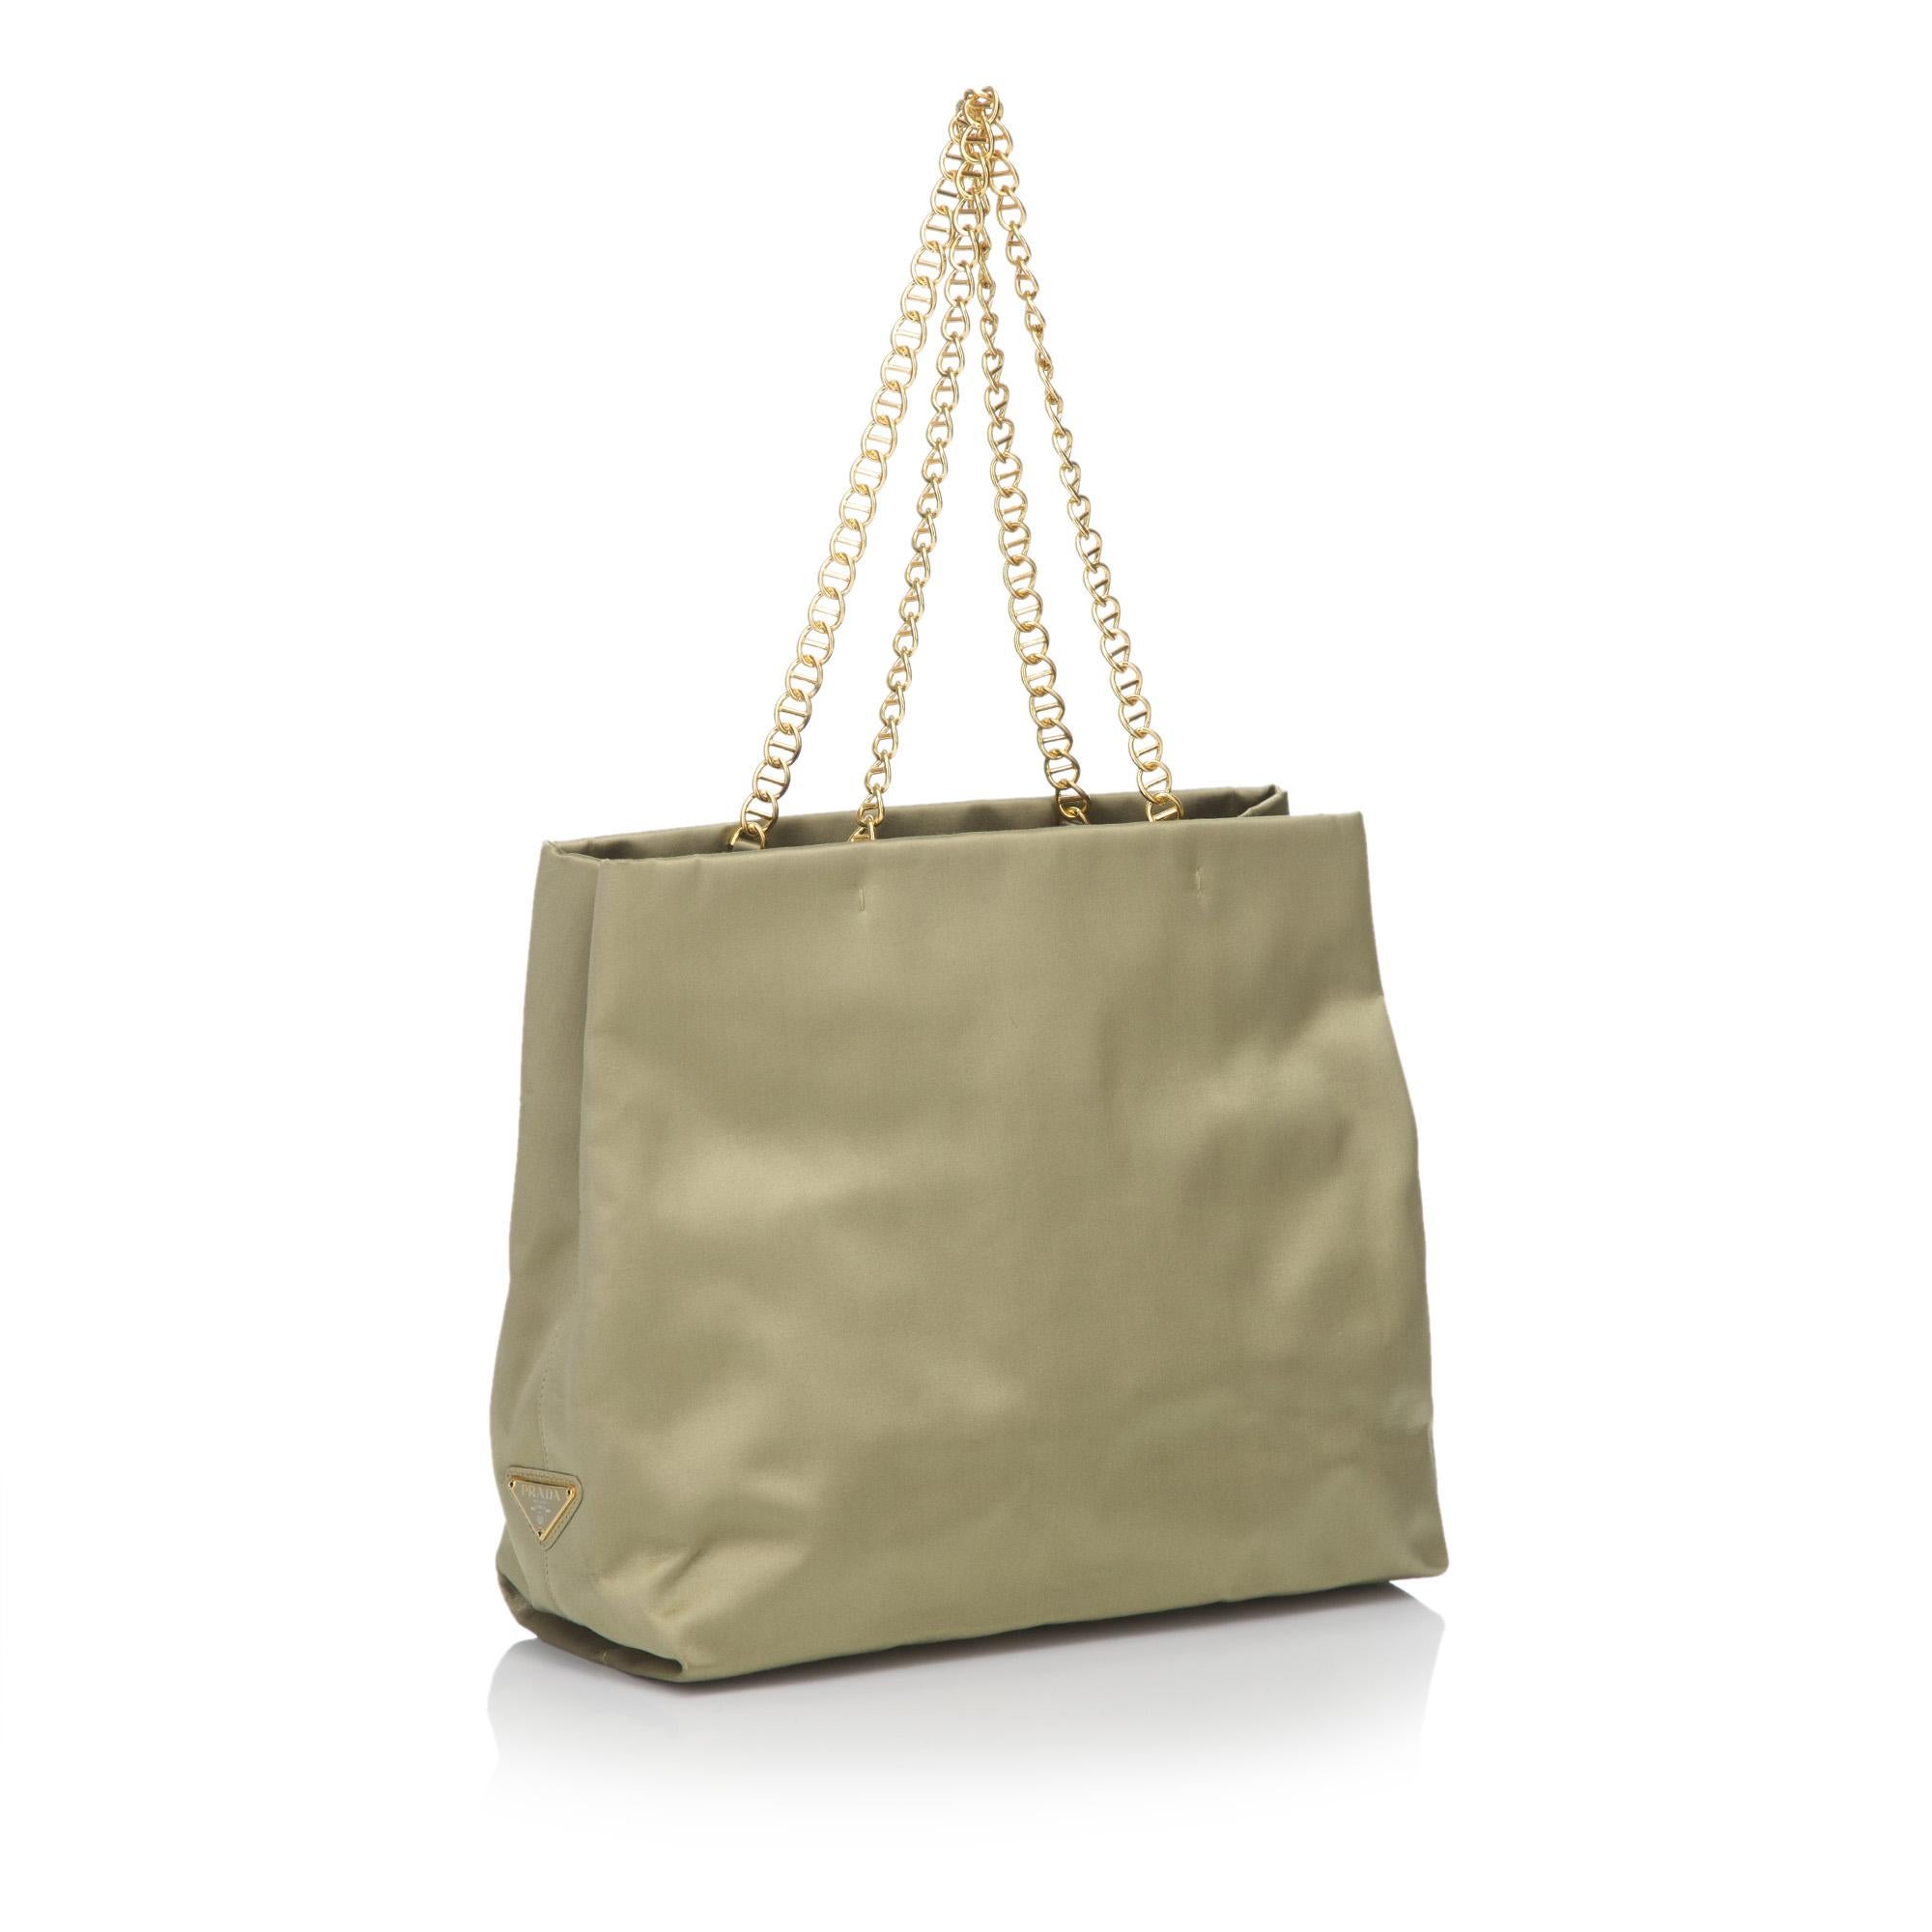 This tote bag features a satin body, gold-tone chain handles, open top and interior zip pocket. It carries as B condition rating.

Inclusions: 
Dust Bag
Dimensions:
Length: 34.00 cm
Width: 28.00 cm
Depth: 11.00 cm
Hand Drop: 23.00 cm
Shoulder Drop: